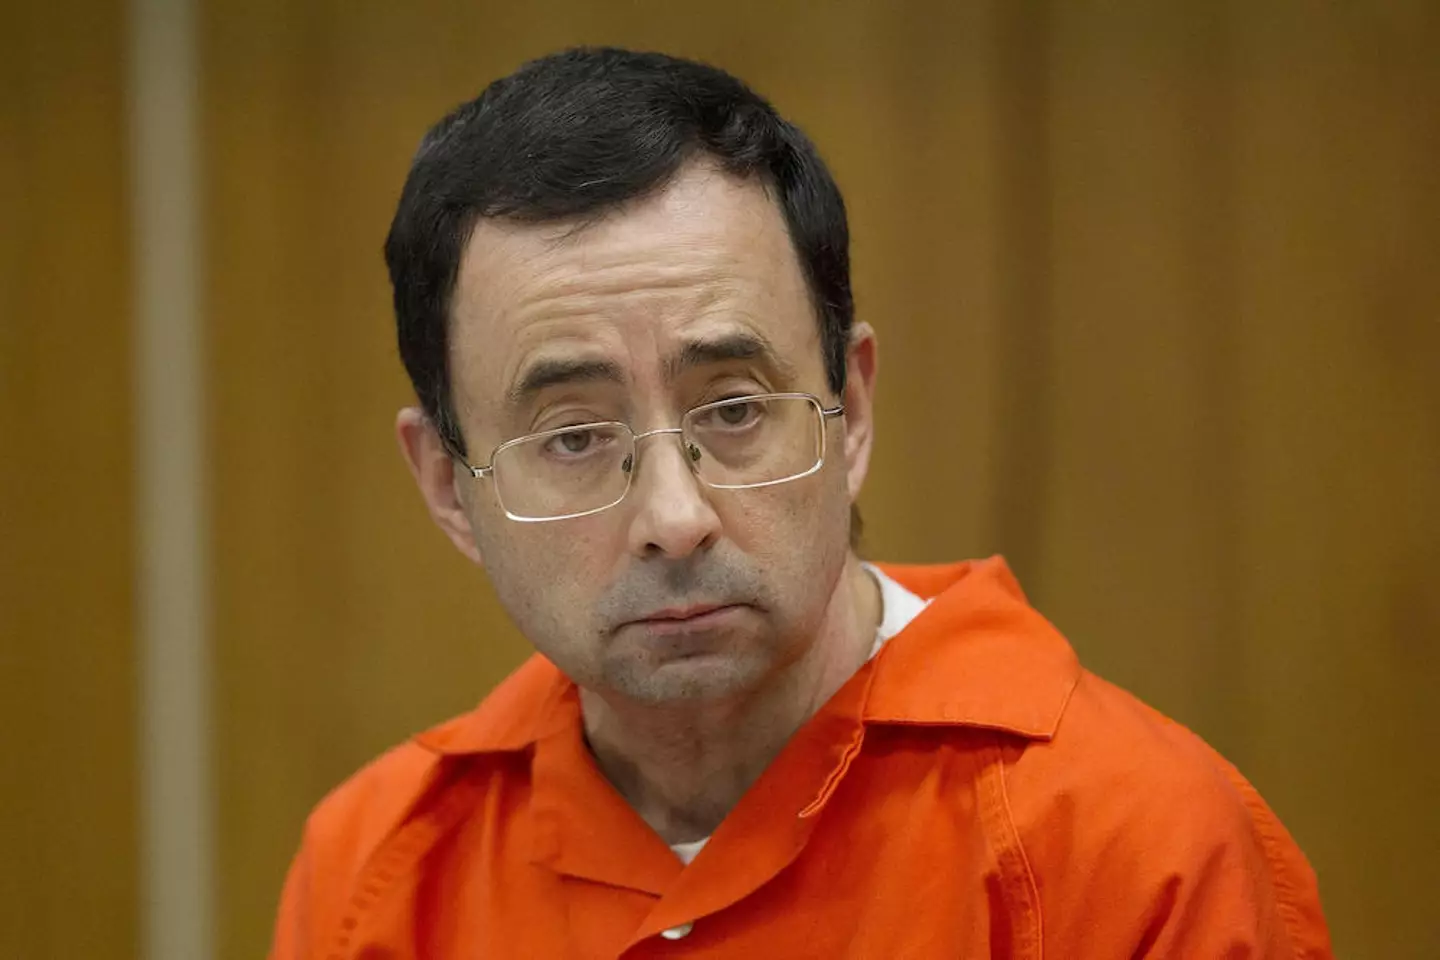 Larry Nassar will spend the rest of his life behind bars.